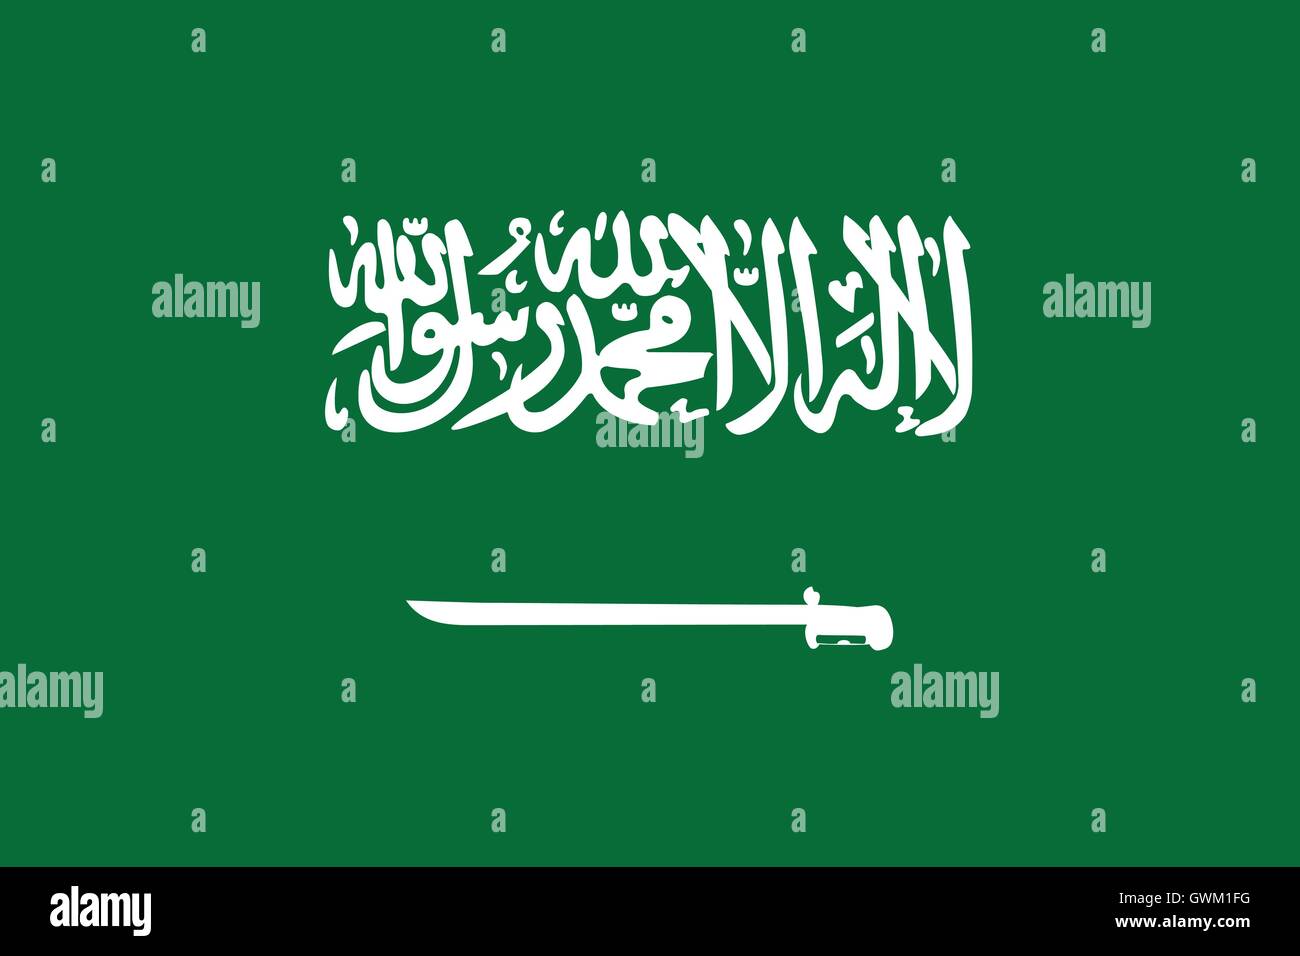 Saudi Arabia flag, correct colors and proportion, accurate vector illustration. Stock Vector